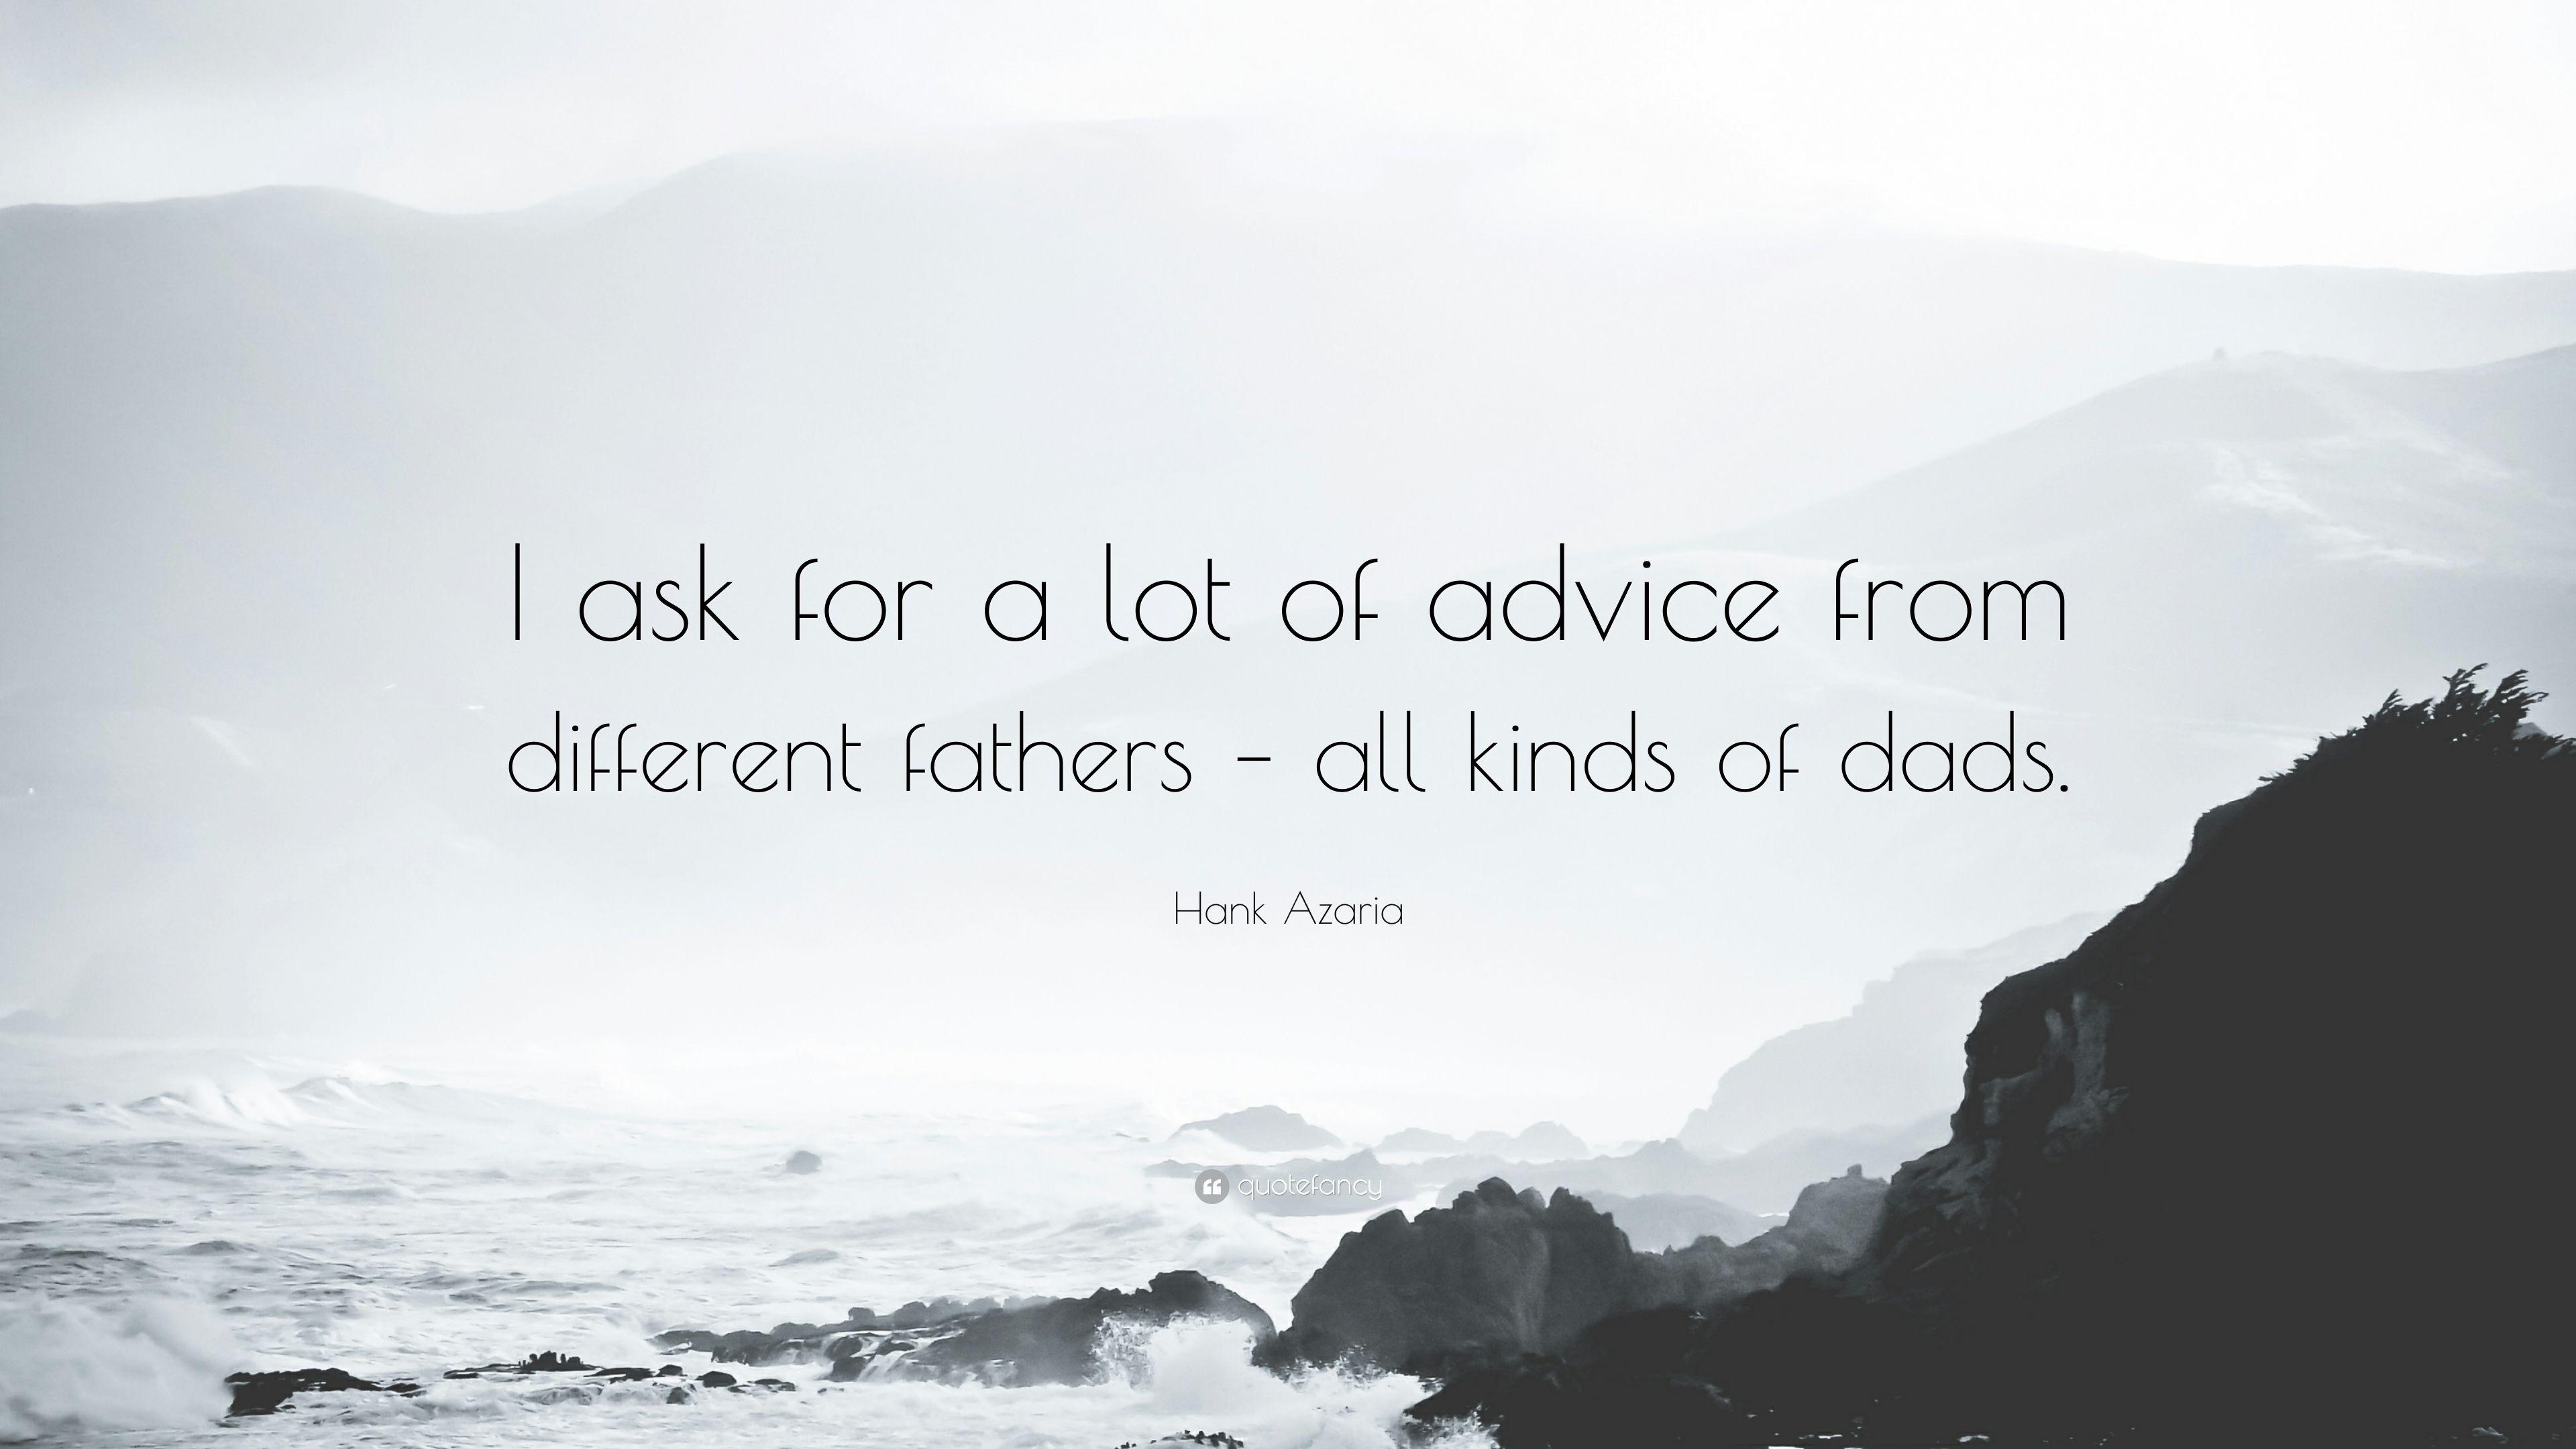 Hank Azaria Quote: “I ask for a lot of advice from different fathers